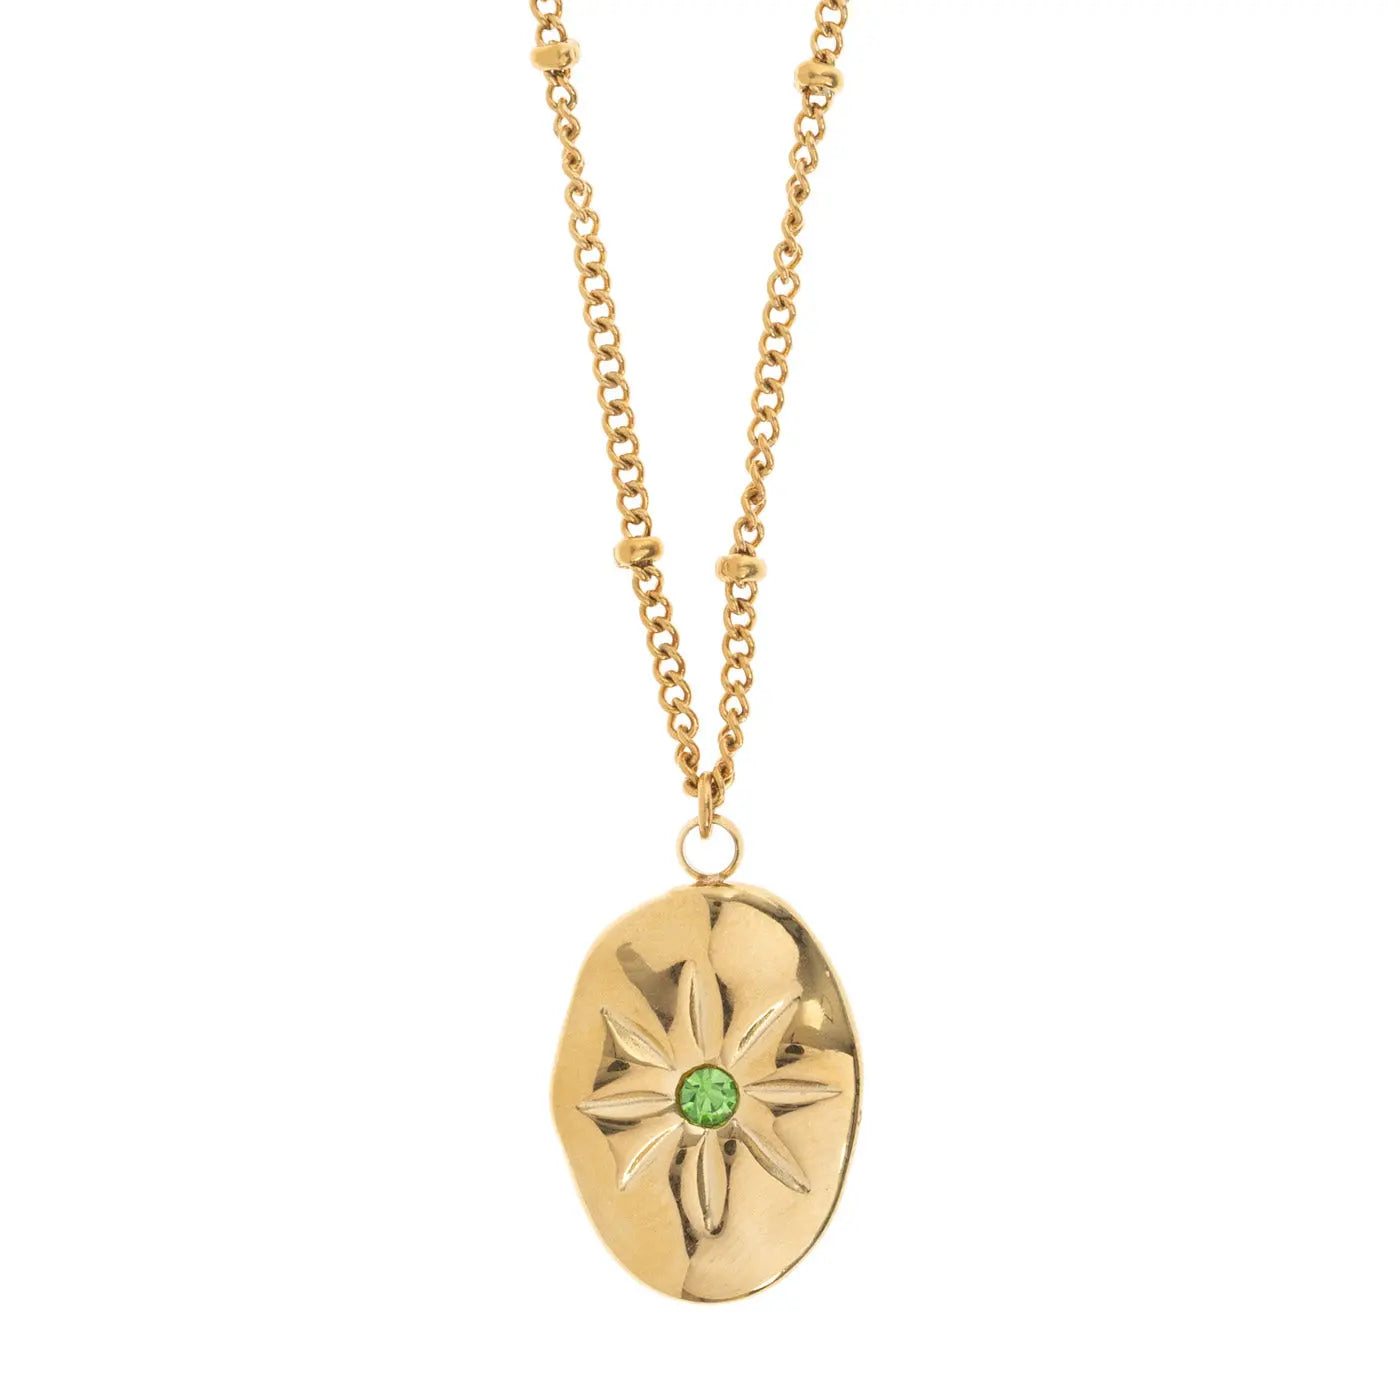 Delilah - Necklace with Gold Brick Crystal Pendant Stainless Steel